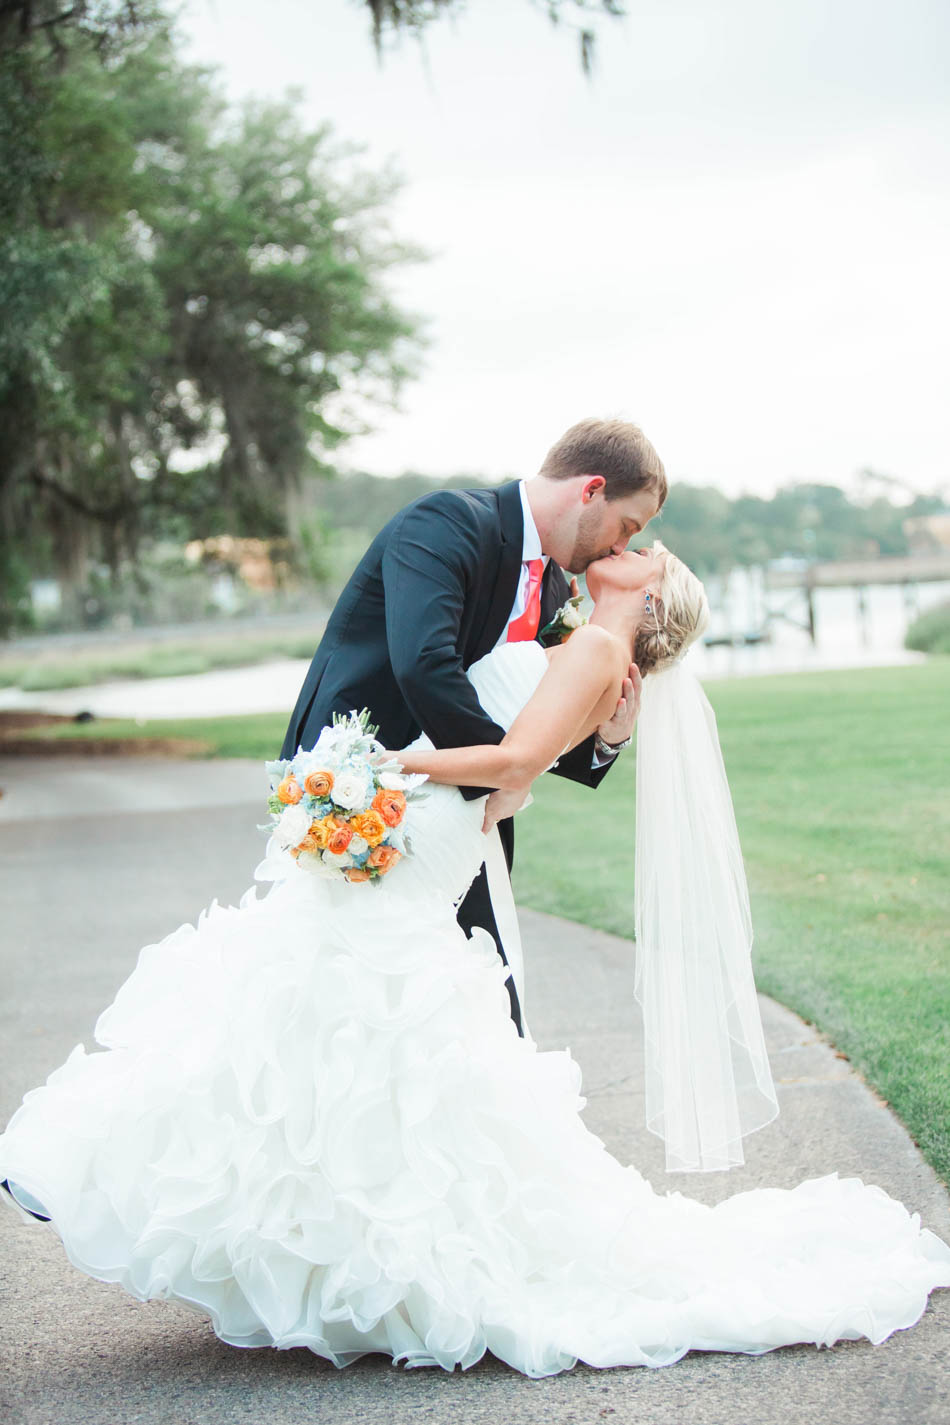 Bride and groom kiss in field, Dunes West Golf and River Club, Mt Pleasant, South Carolina. Kate Timbers Photography. http://katetimbers.com